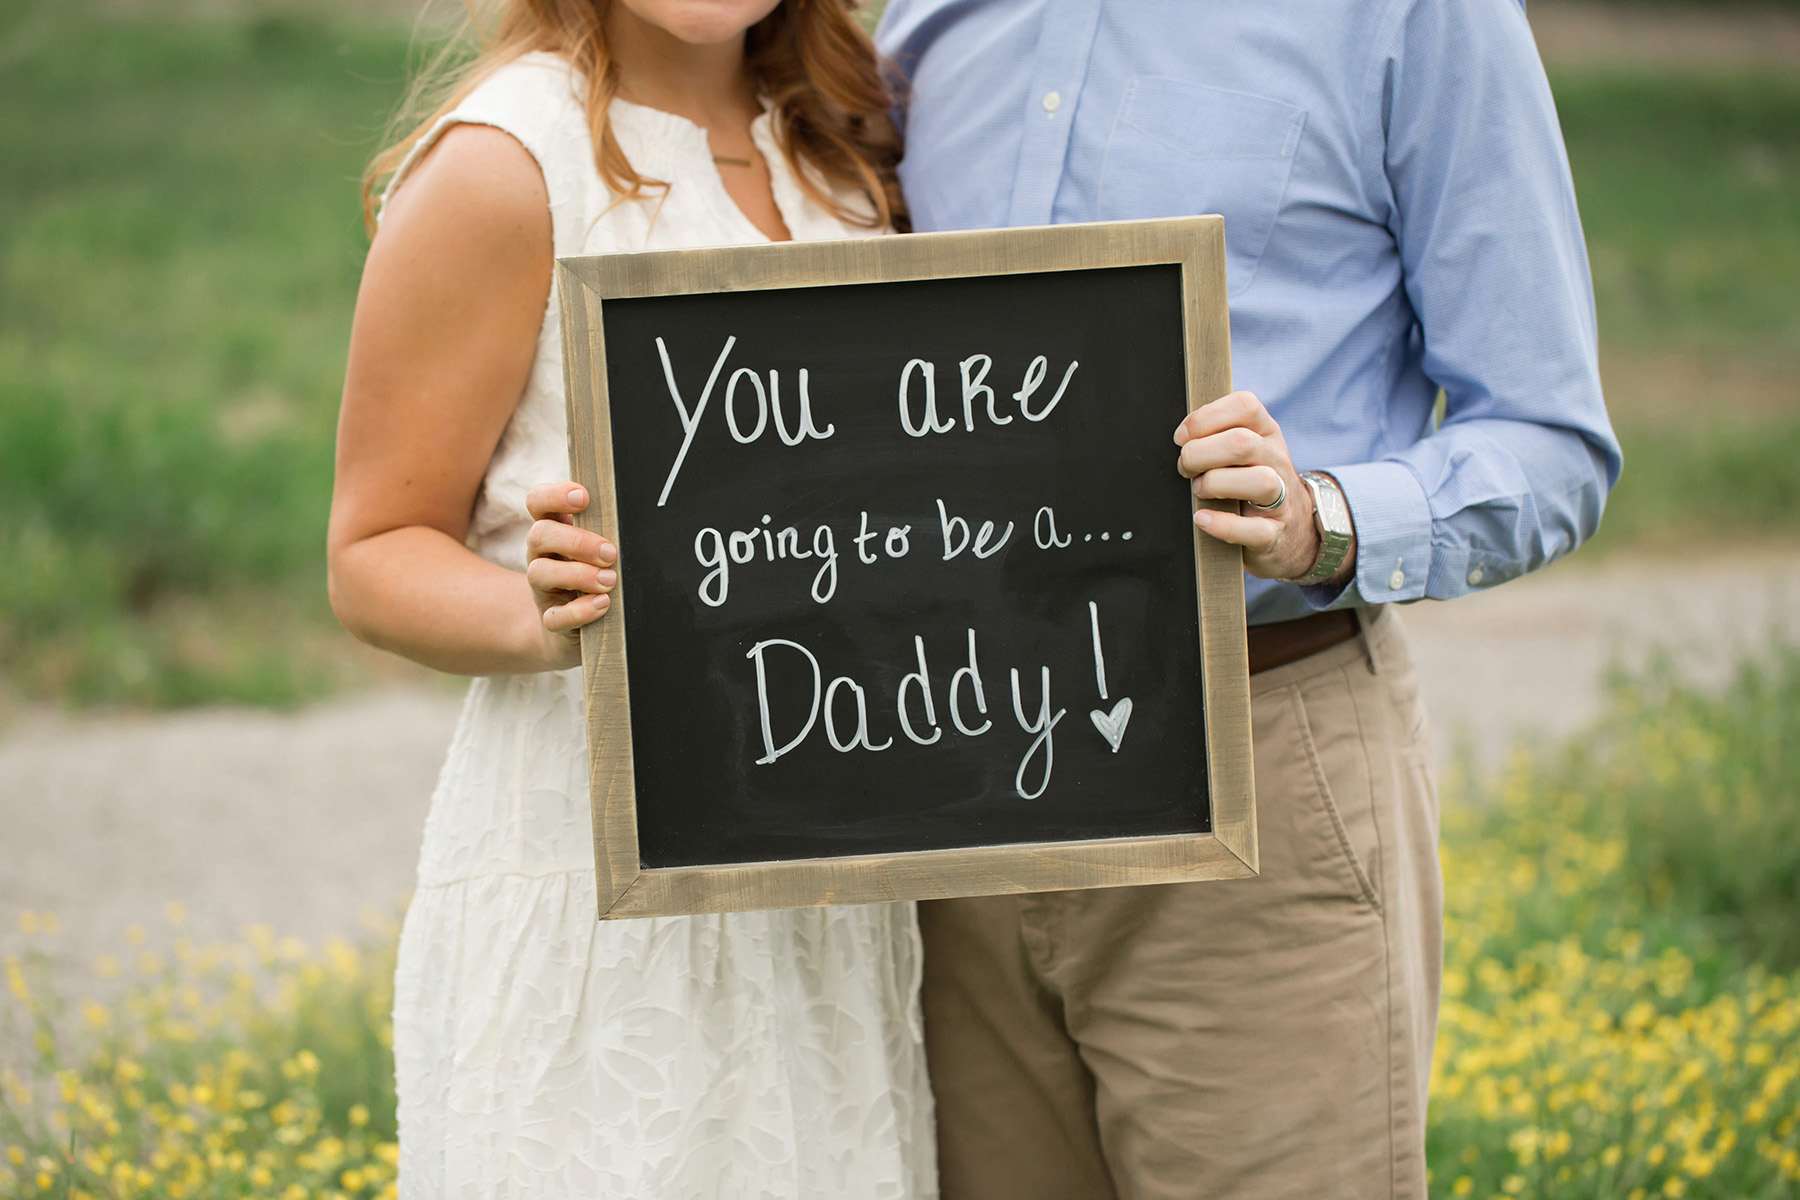 Louisville newborn photographer | julie brock photography | fun pregnancy announcement | louisville maternity photographer | he was surprised by his wife that she is pregnant